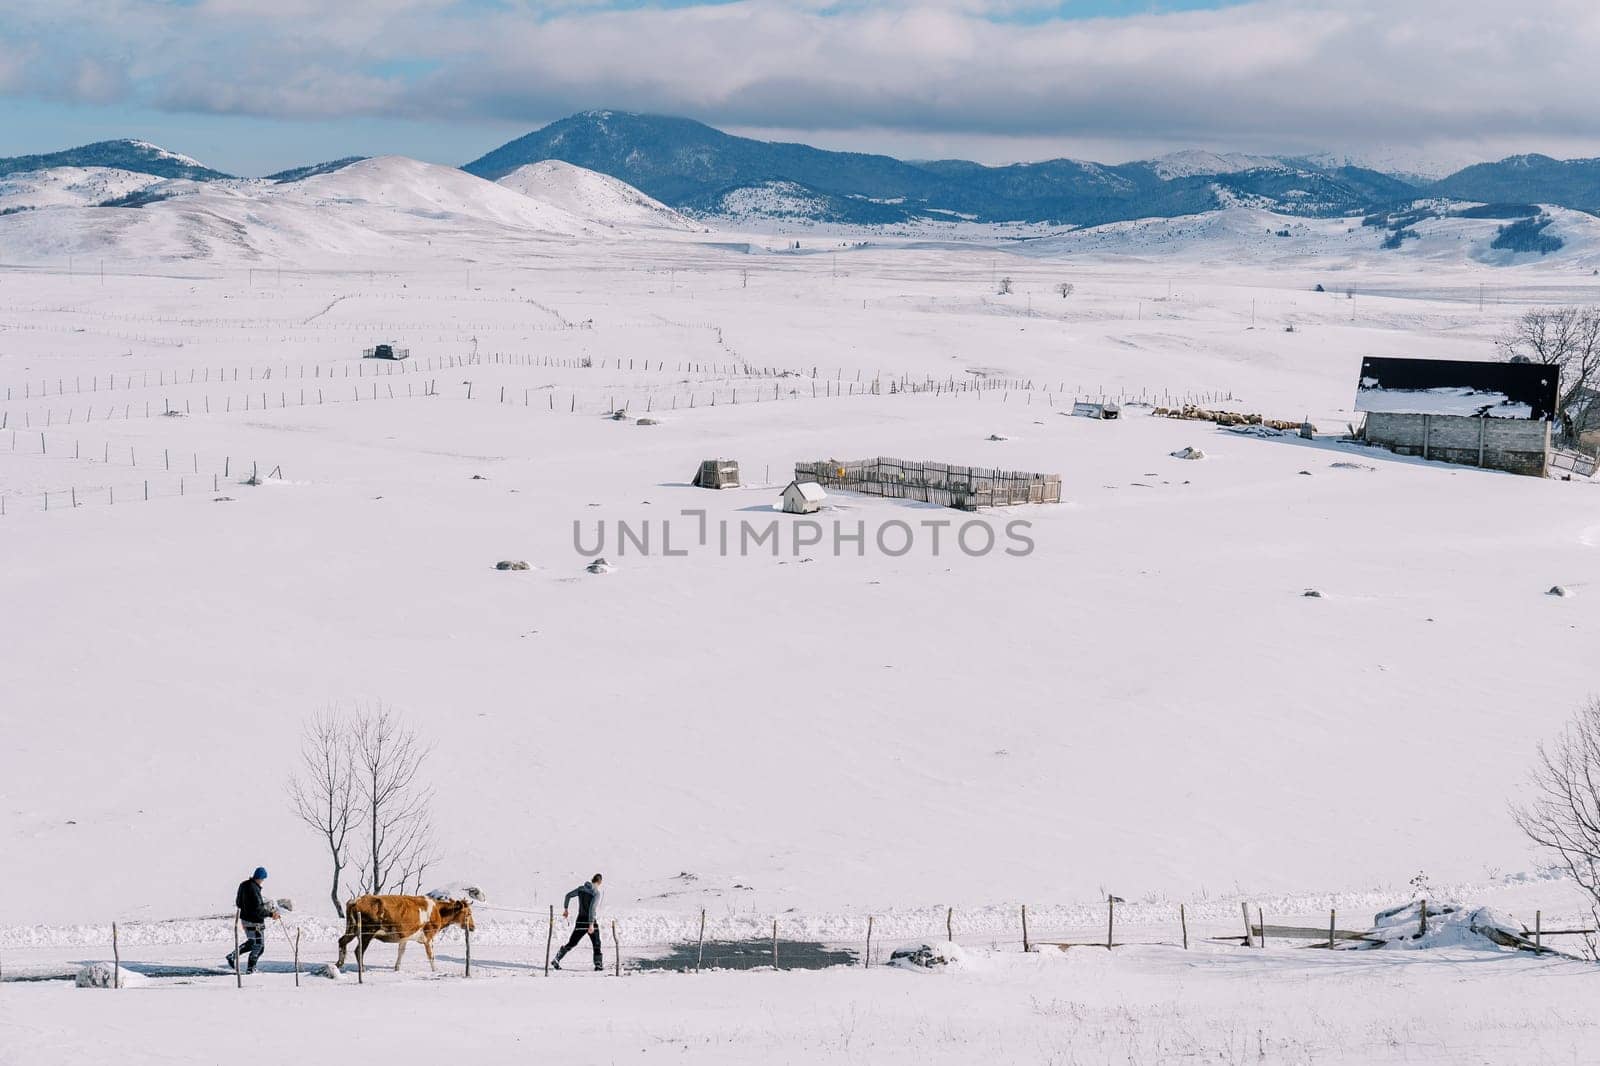 Farmers lead a cow on a rope along the snowy road in the village. High quality photo